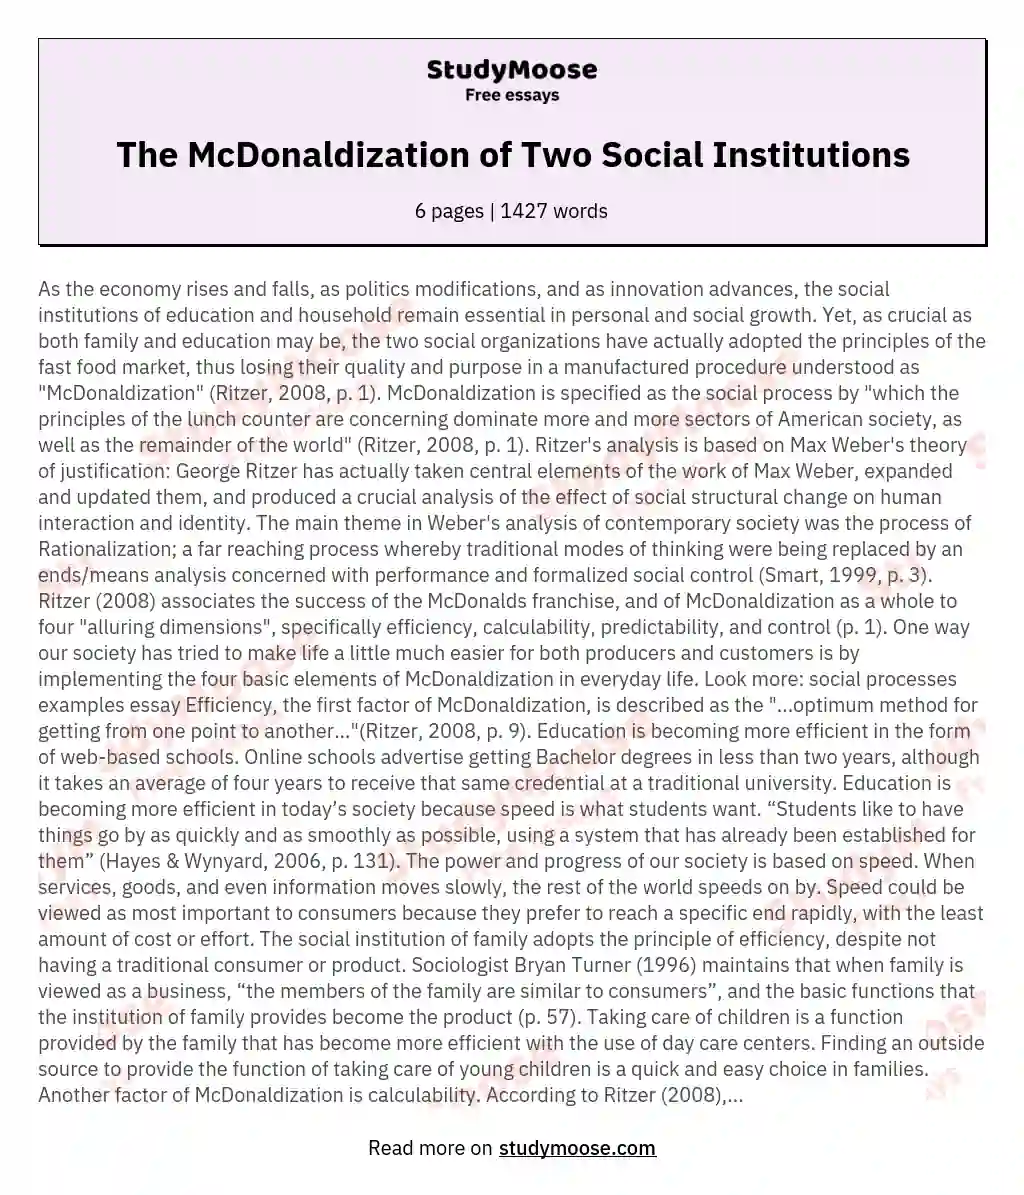 The McDonaldization of Two Social Institutions essay